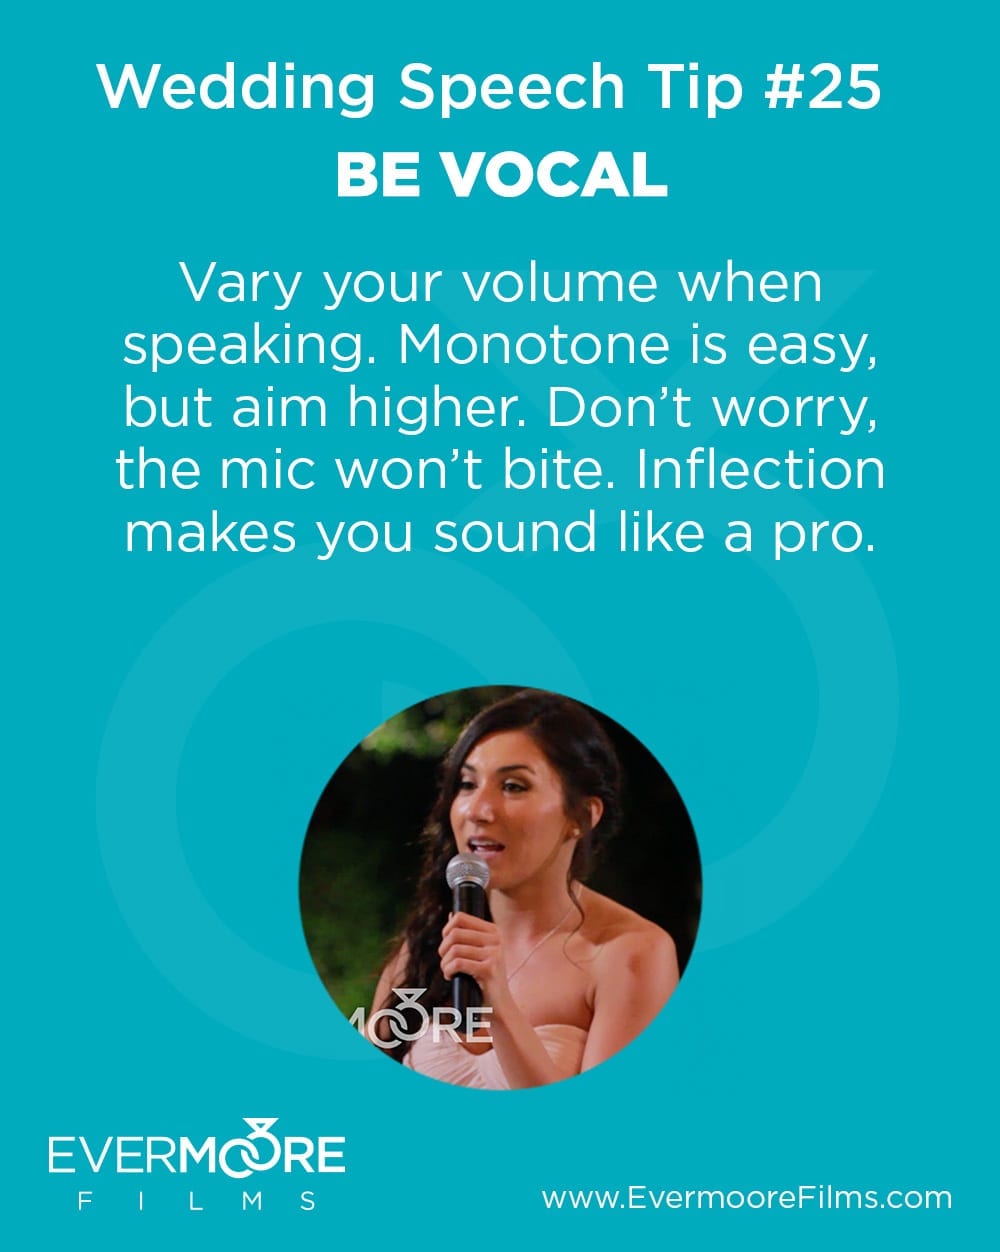 Be Vocal | Wedding Speech Tip #25 | Evermoore Films | Vary your volume when speaking. Monotone is easy, but aim higher. Don't worry, the mic won't bite. Inflection makes you sound like a pro.